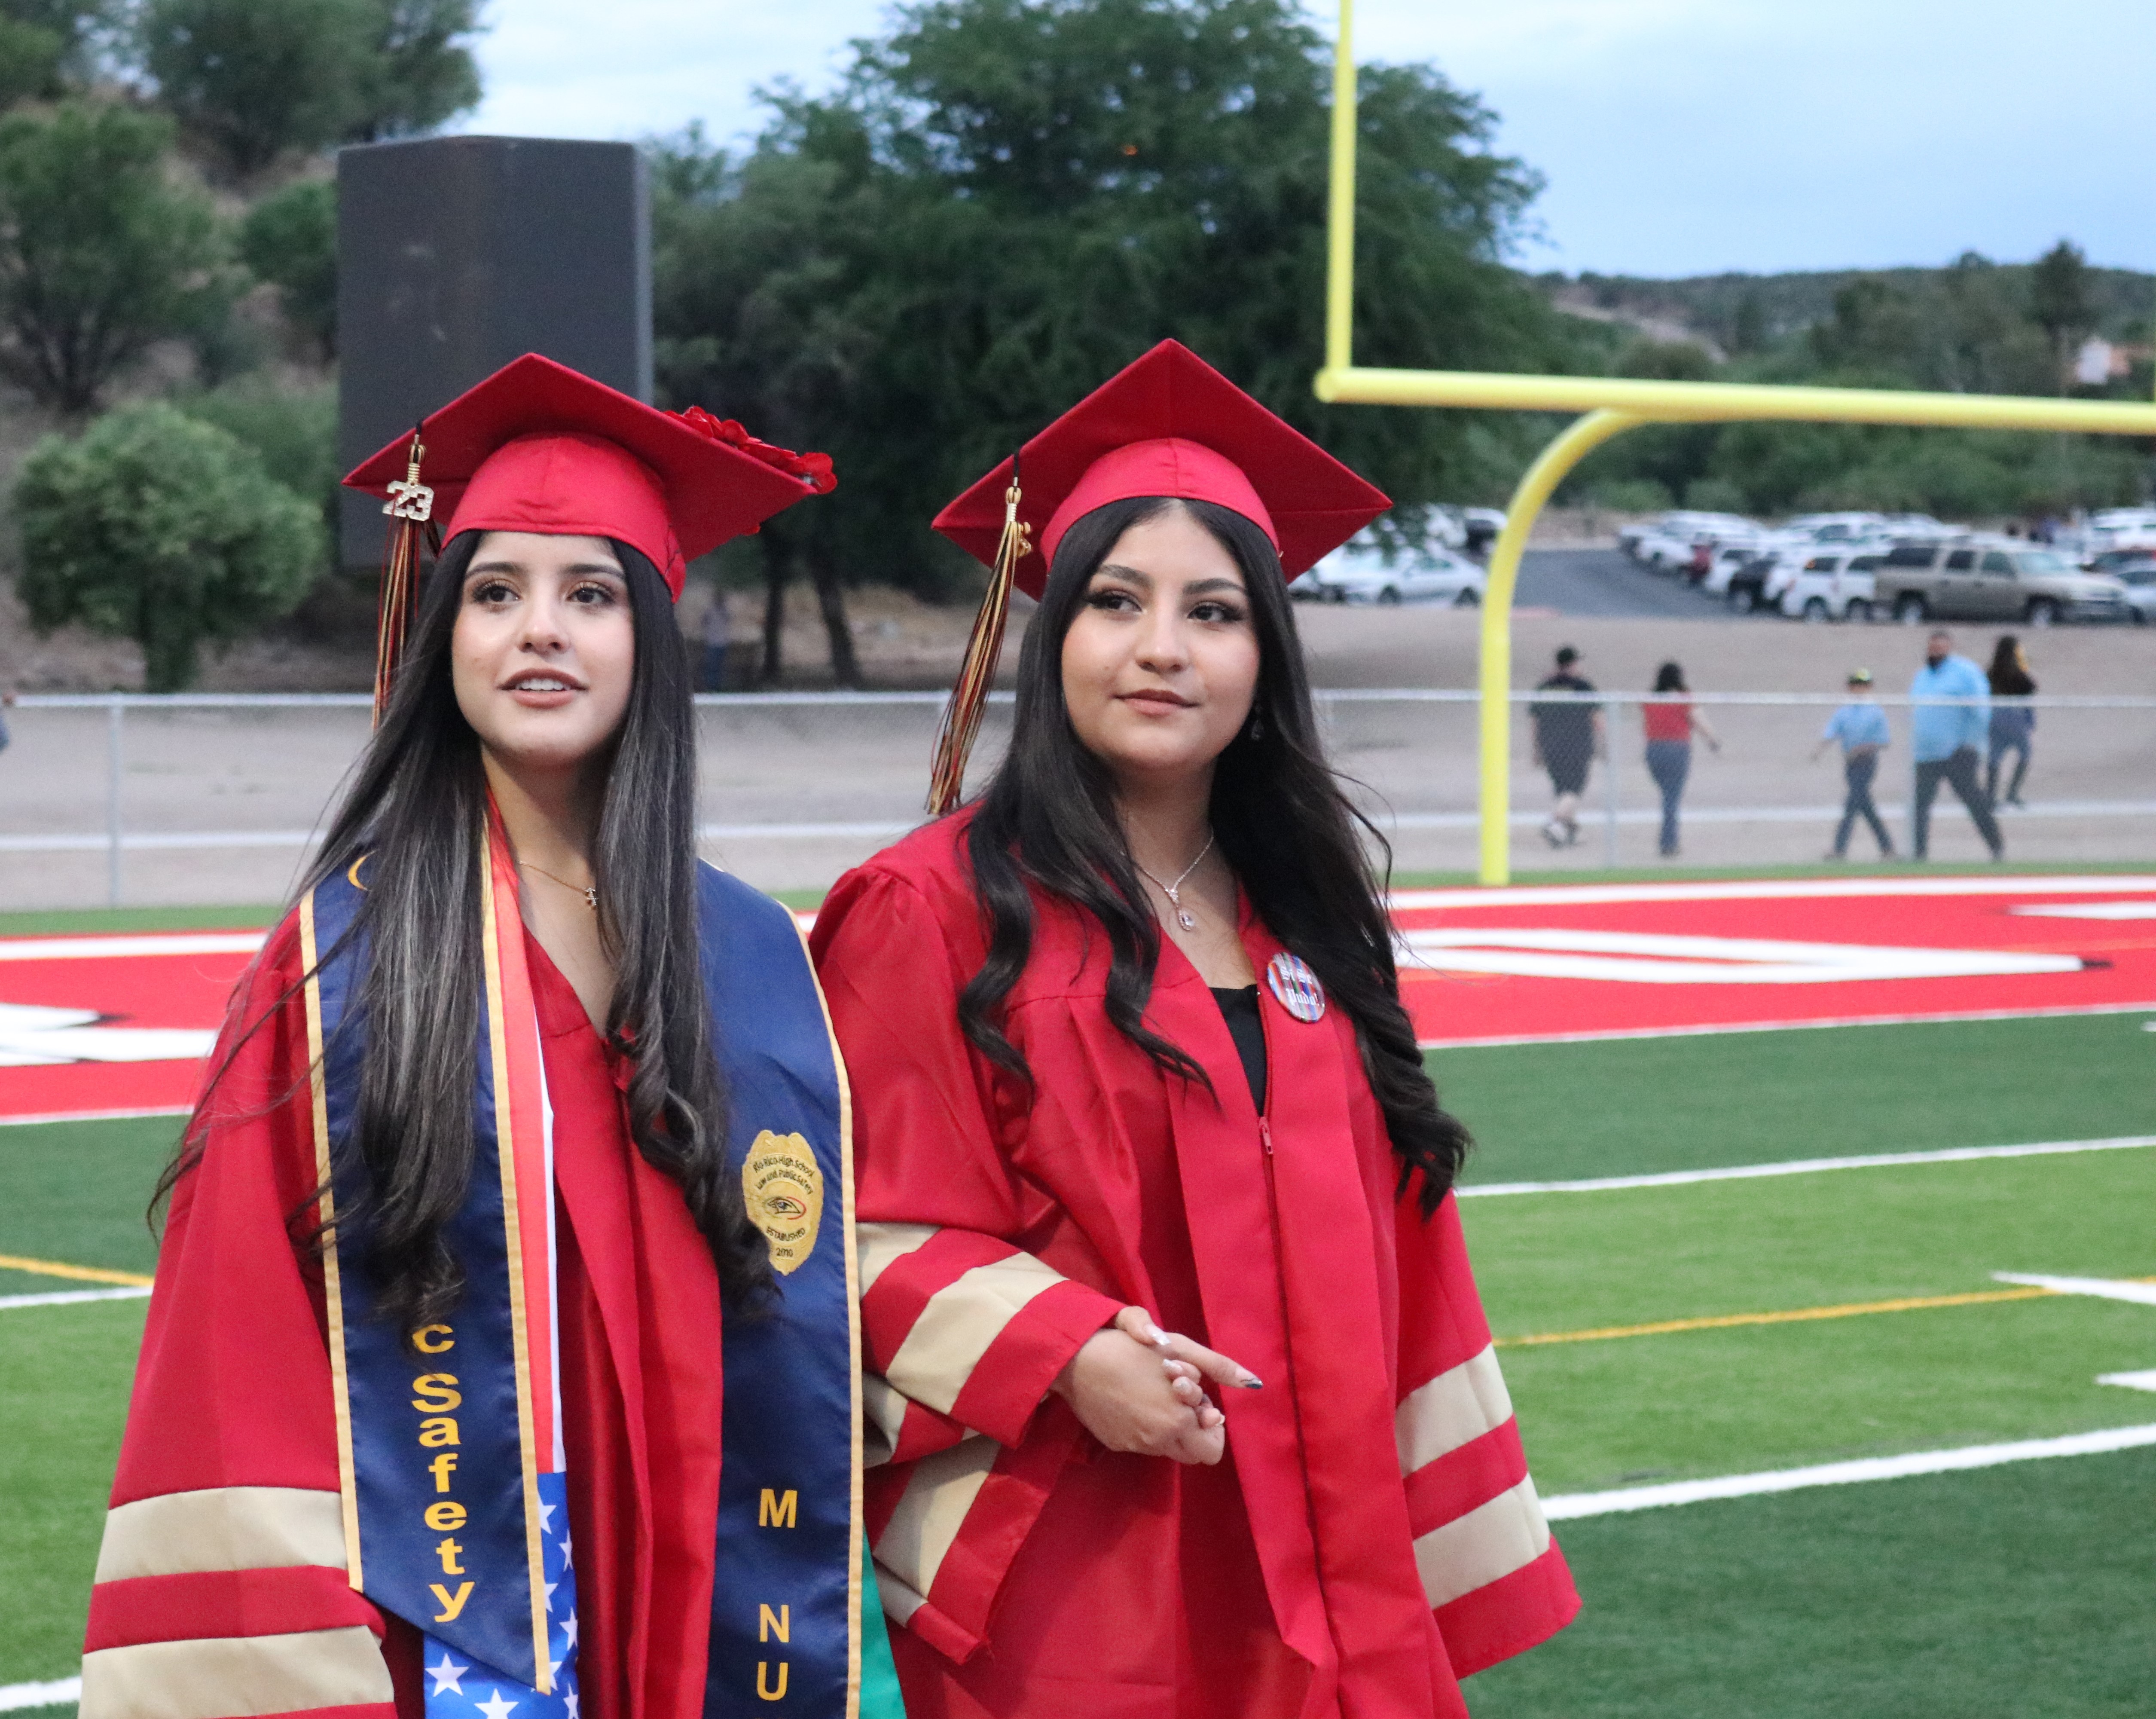 Two seniors in cap and gowns walking the football field